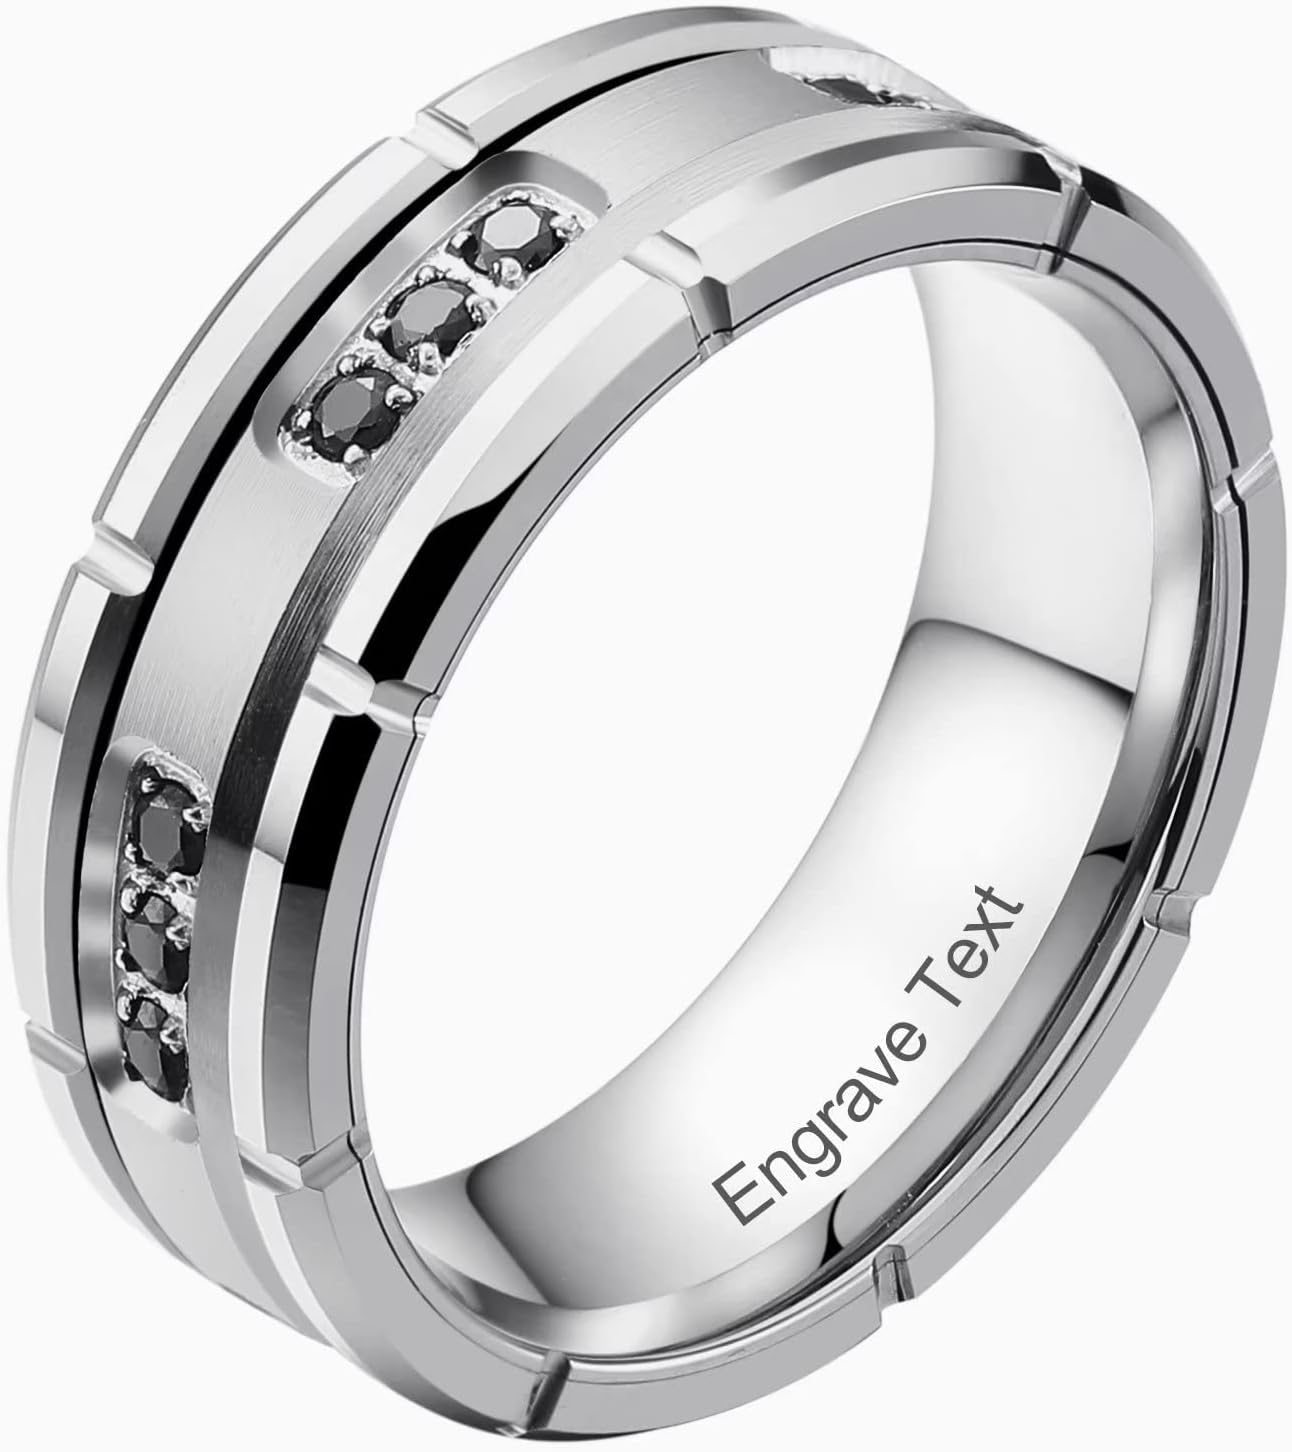 King Will GEM Custom Engraving Mens 8mm Tungsten Carbide Ring Cubic Zircon Stones Engagement Wedding Promise Band for Women Men Personalized